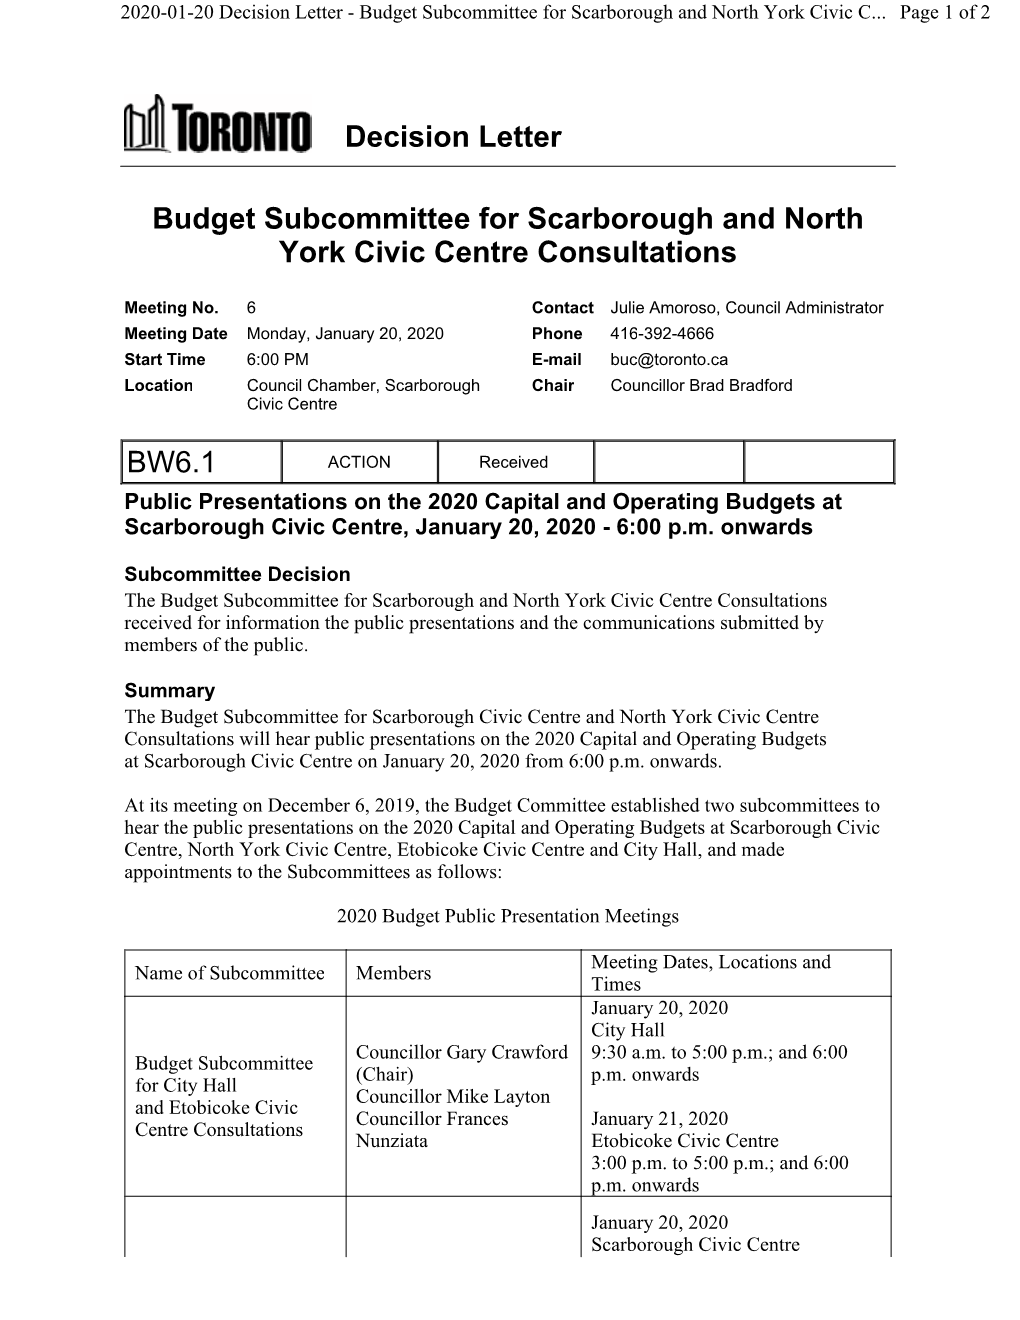 Decision Letter Budget Subcommittee for Scarborough and North York Civic Centre Consultations